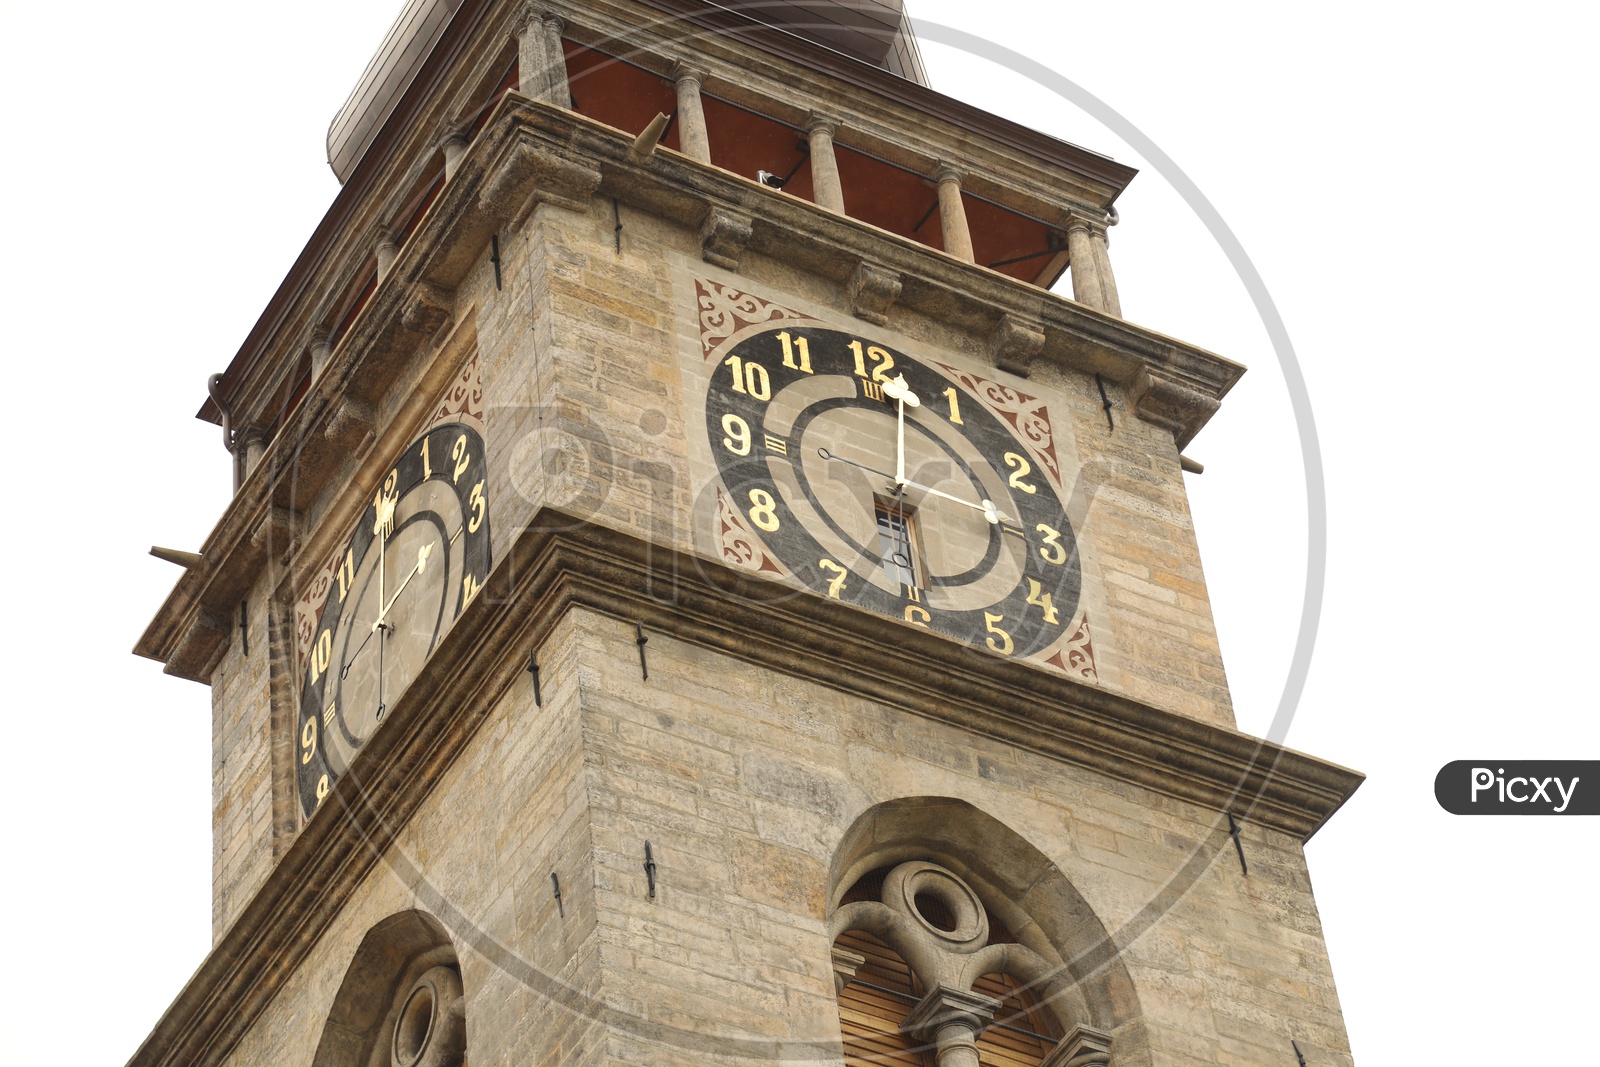 Architecture of a clock tower